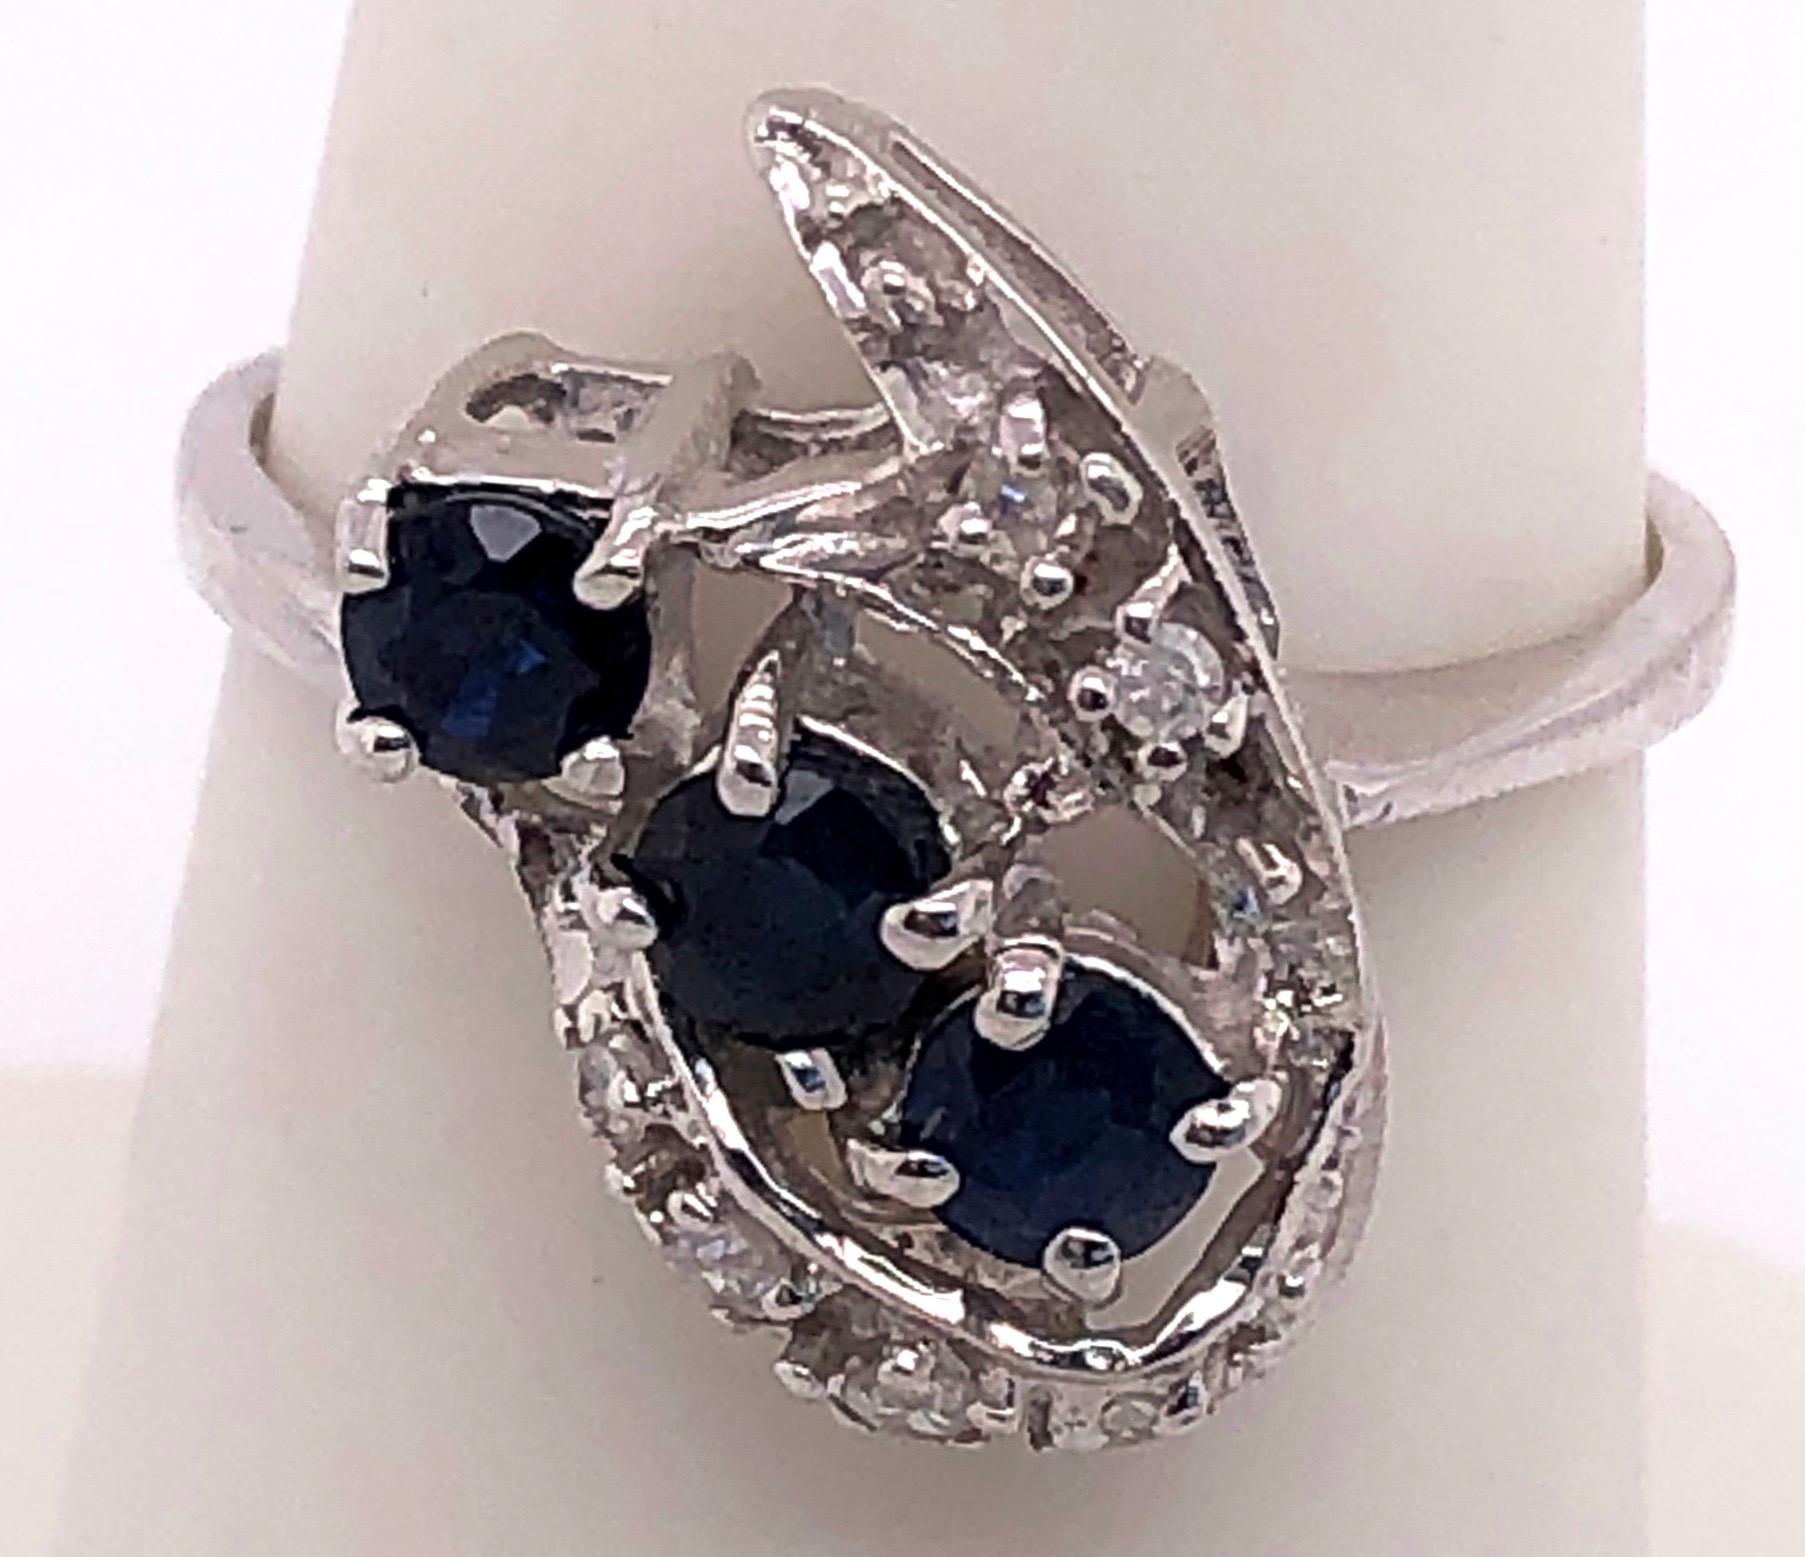 14 Karat White Gold Contemporary Ring with Sapphires and Diamonds.
0.25 total diamond weight.
3 grams total weight.
Size 7